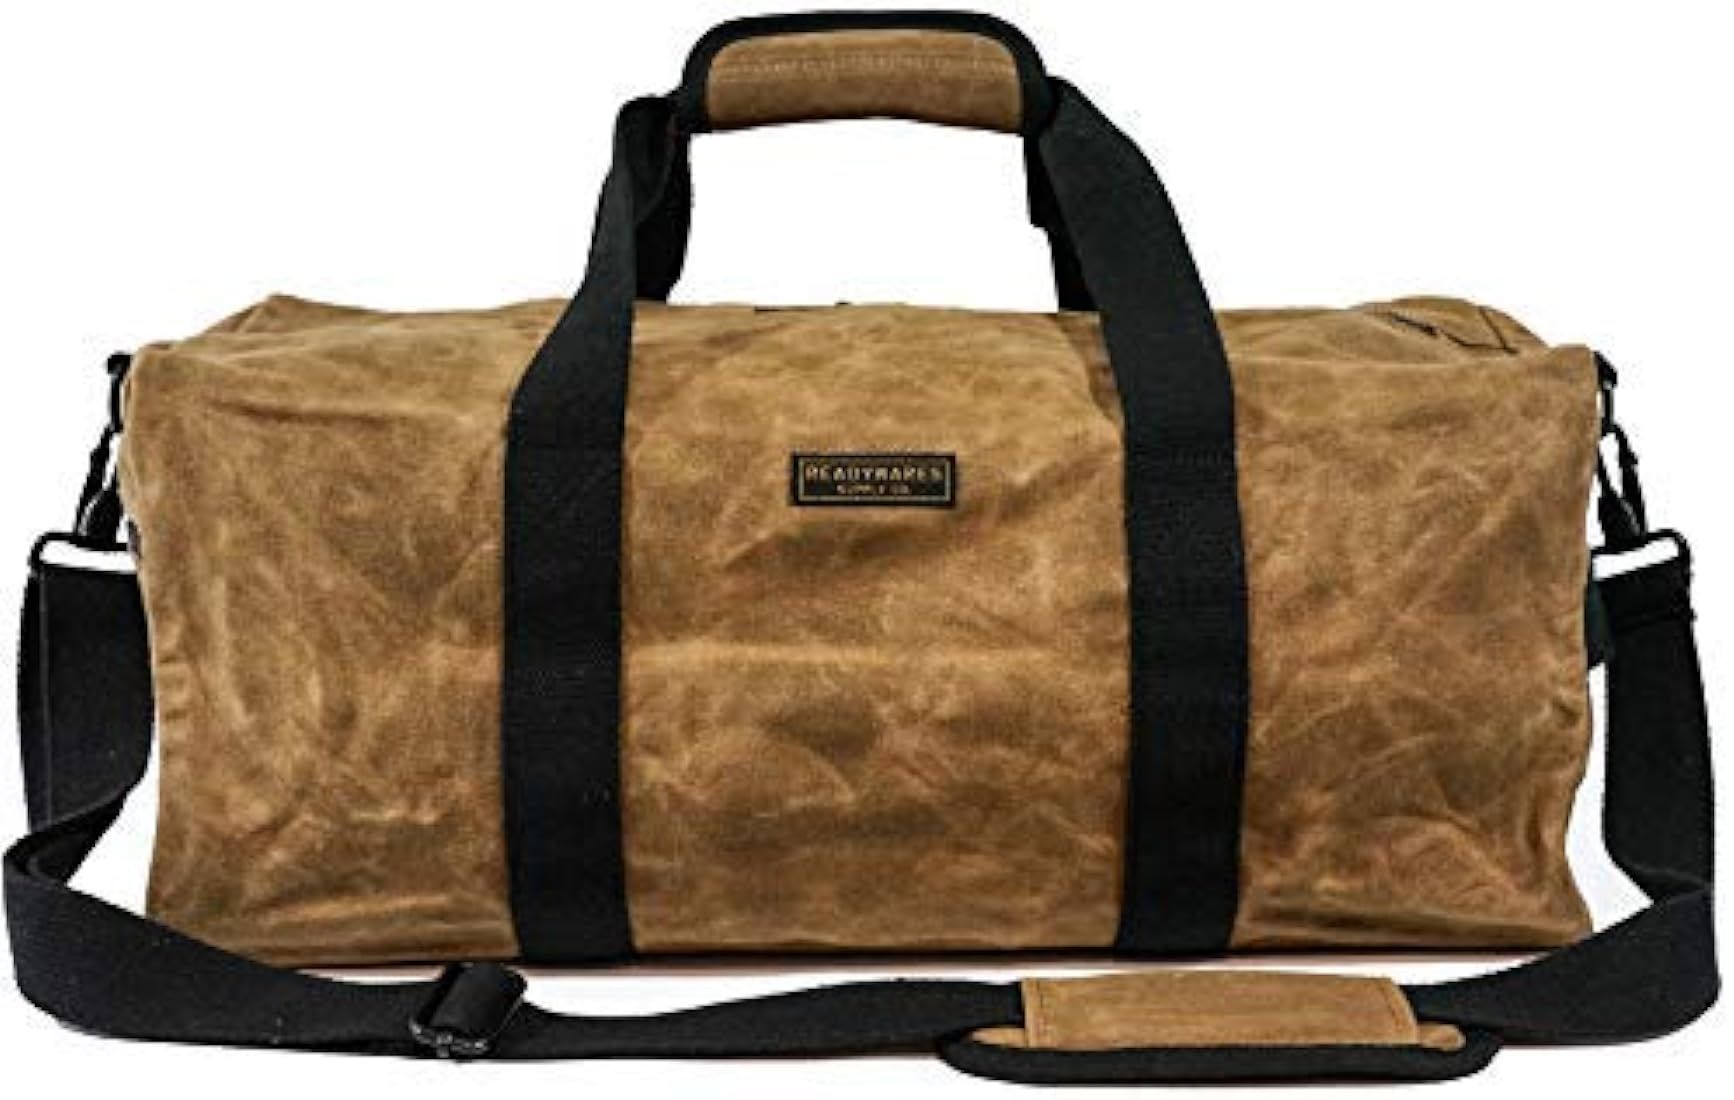 Readywares Waxed Canvas Duffel Bag, Classic Design, Great for Clothes, Tools, and Travel (20", Tan) | Amazon (US)